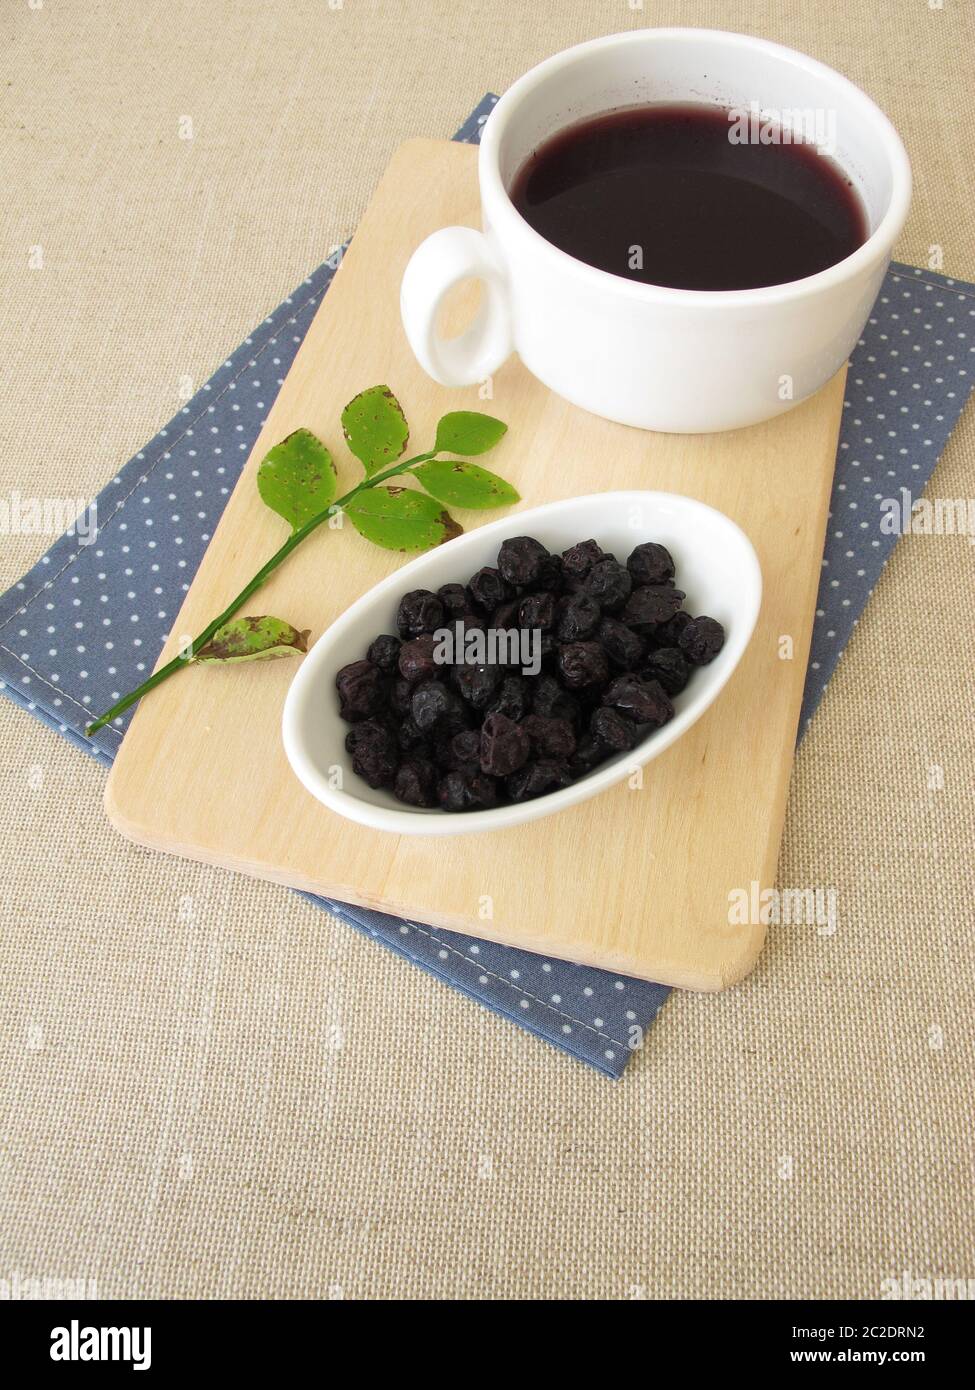 Blueberry tea from dried blueberries Stock Photo